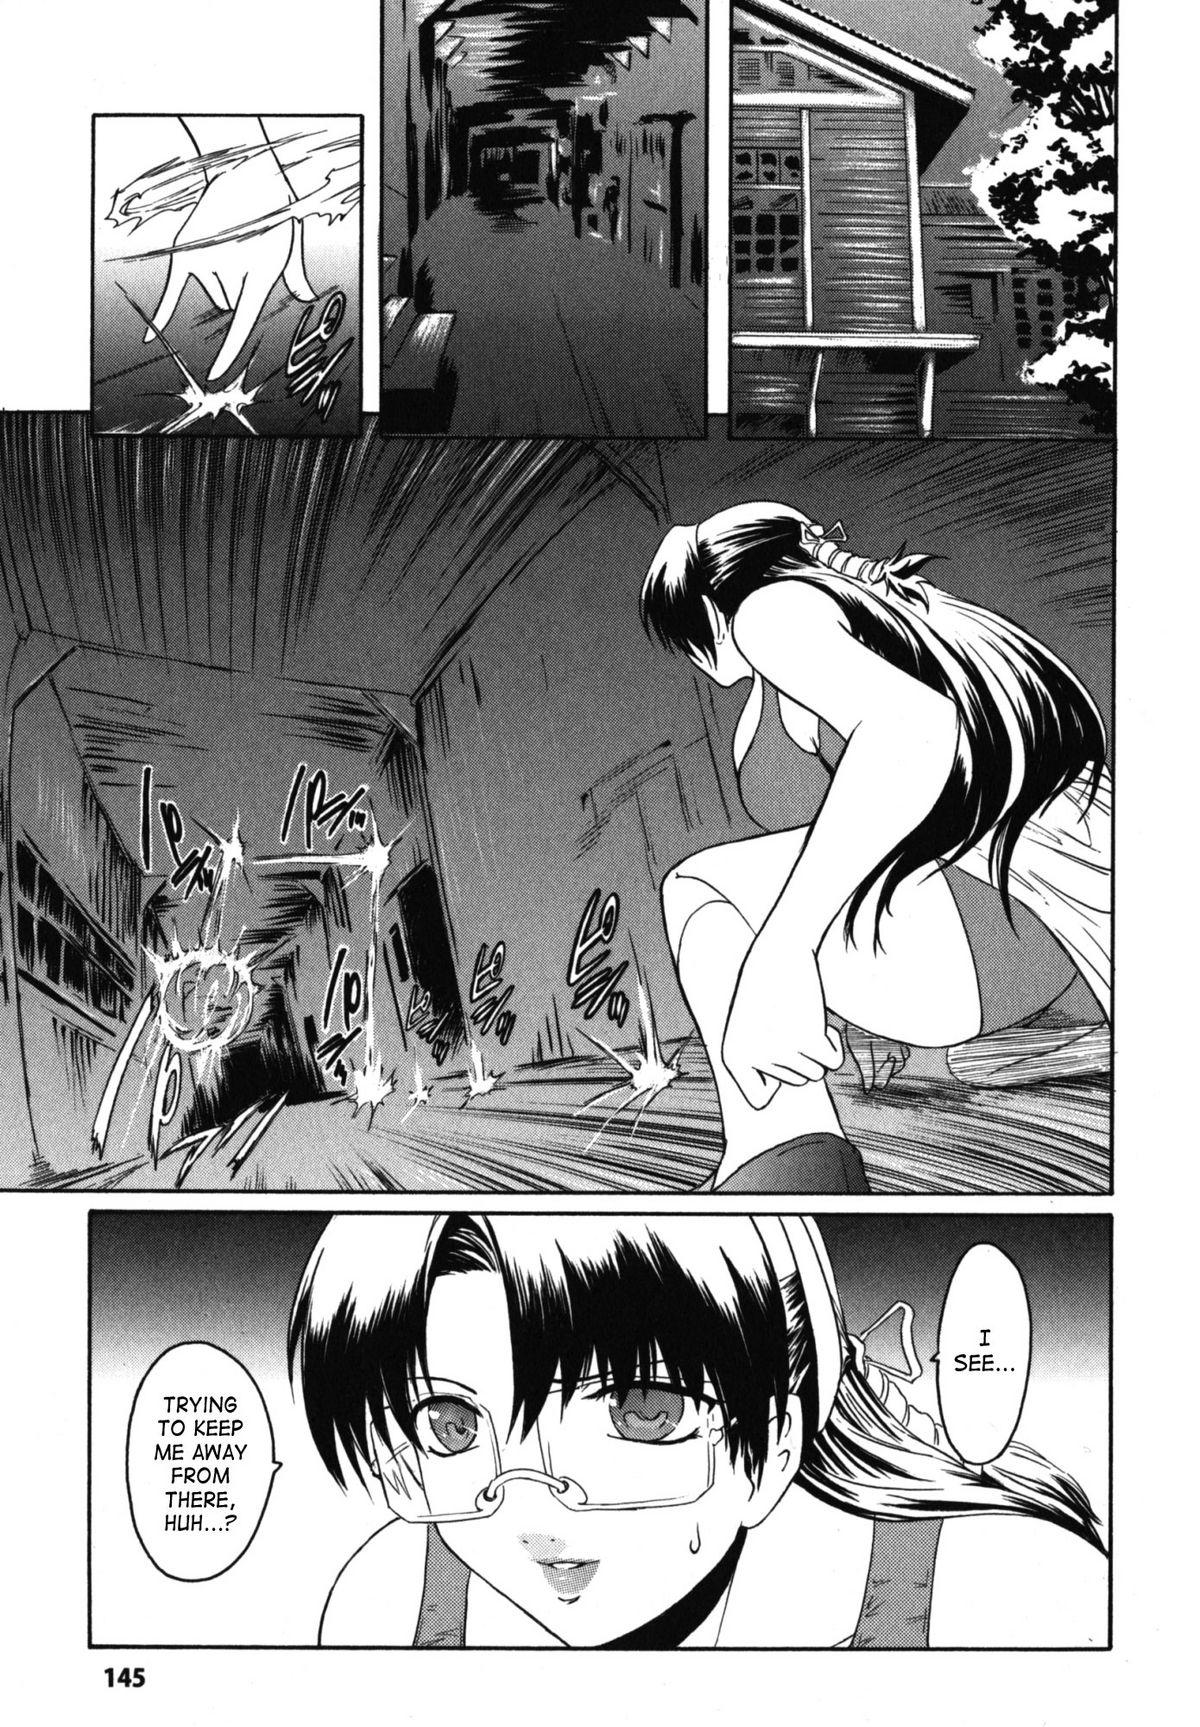 Kabe no Naka no Tenshi Jou | The Angel Within The Barrier Vol. 1 145